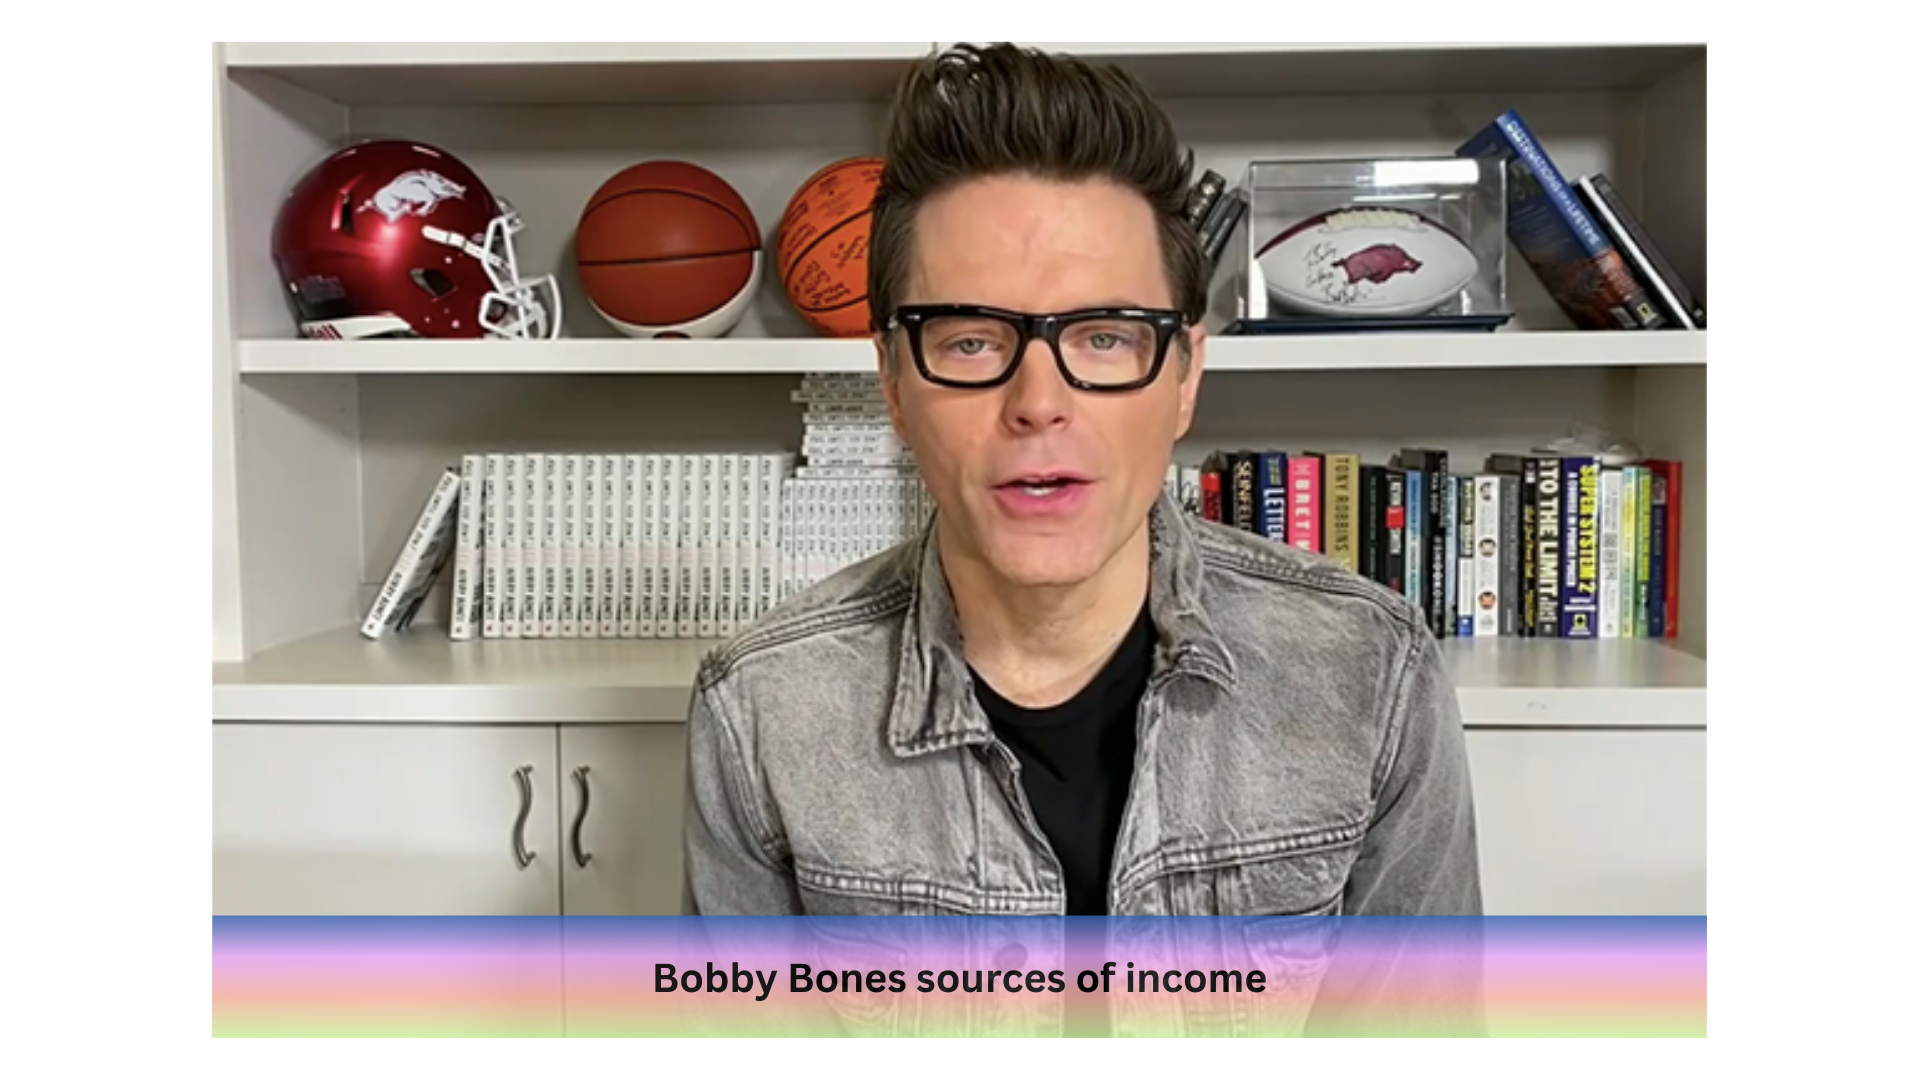 Bobby Bones sources of income